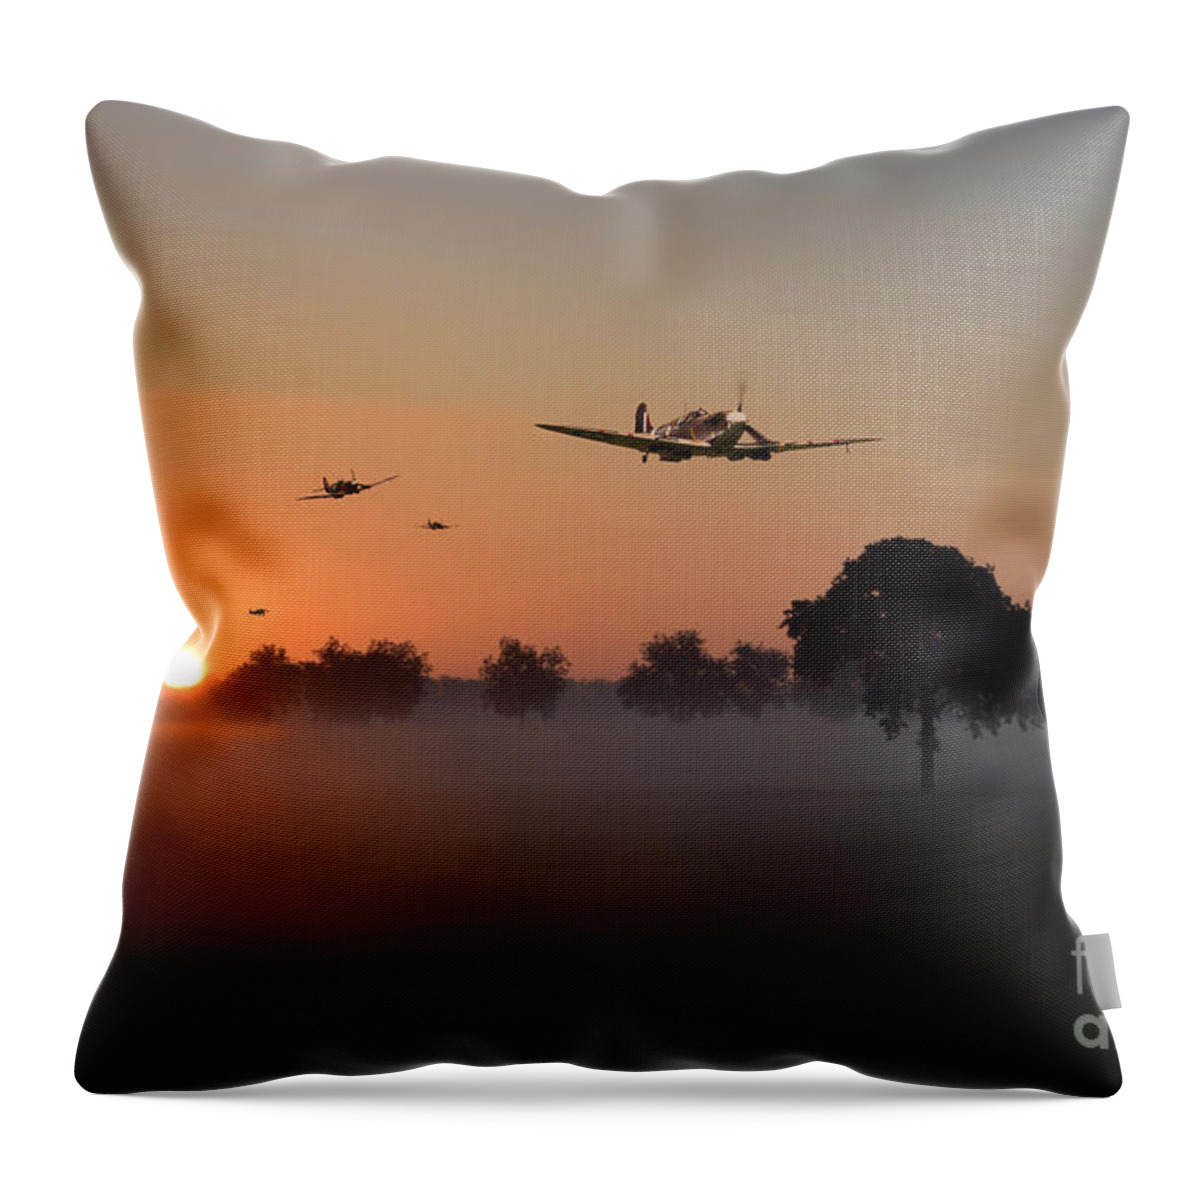 Supermarine Throw Pillow featuring the digital art Early Birds by Airpower Art